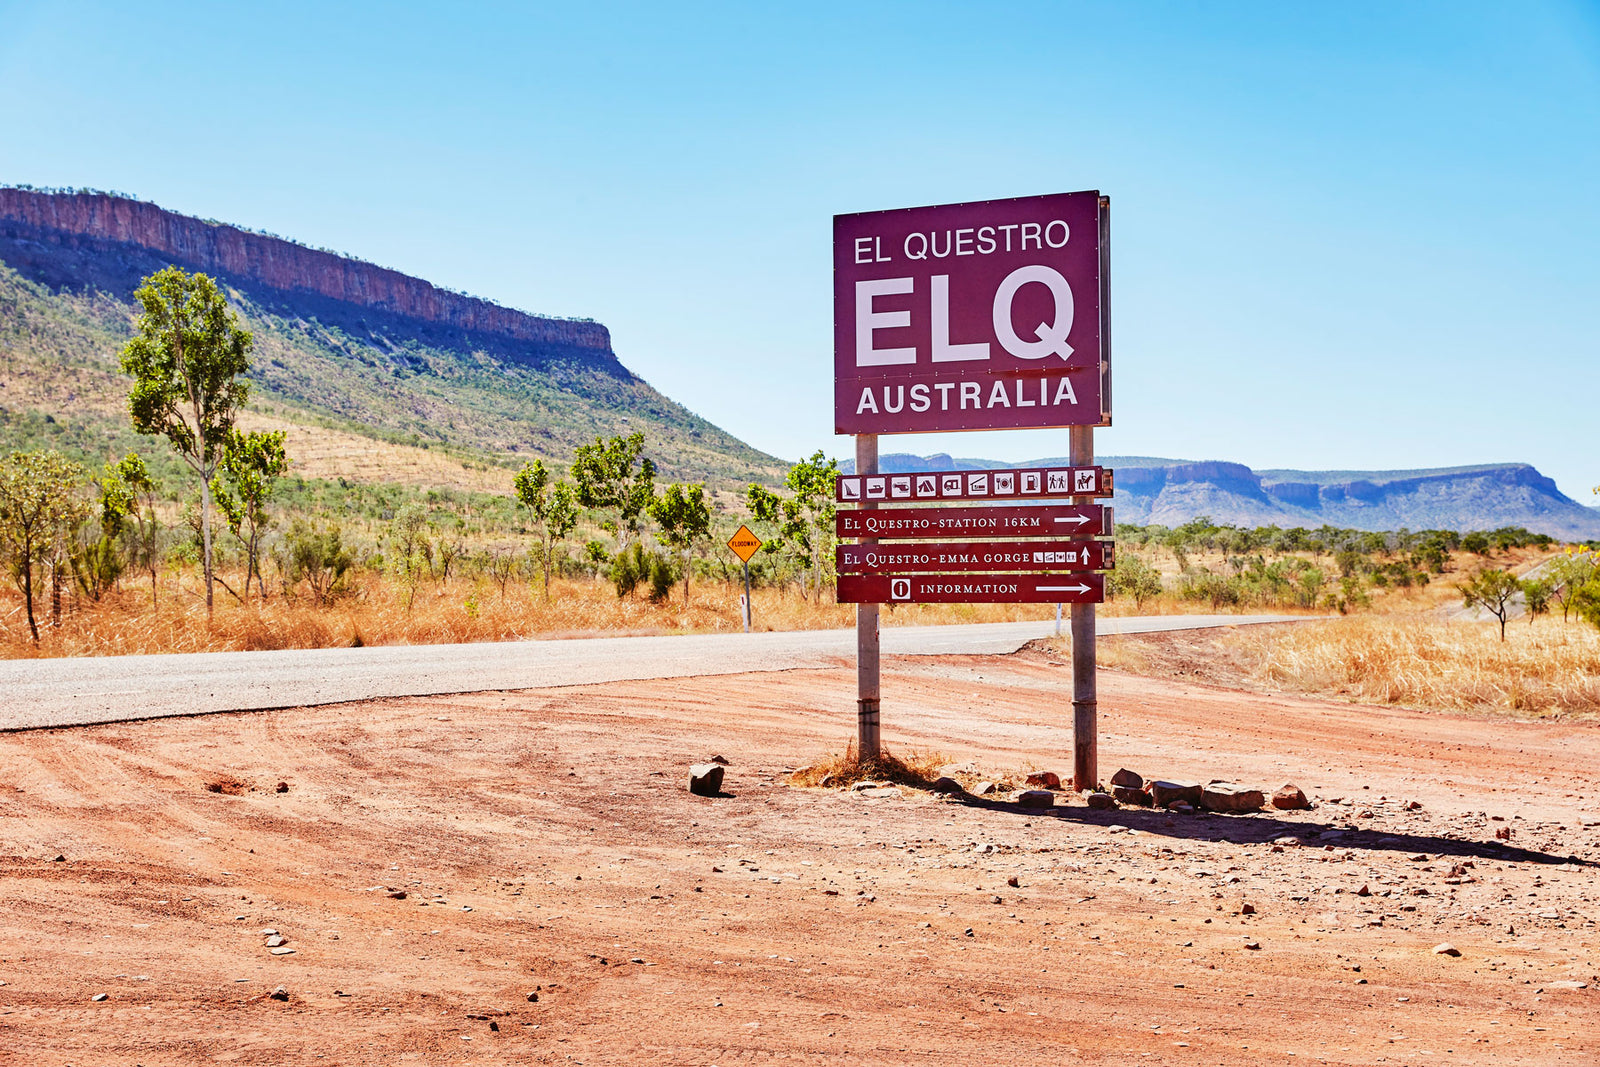 Travel to El Questro - An Outback Wonderland